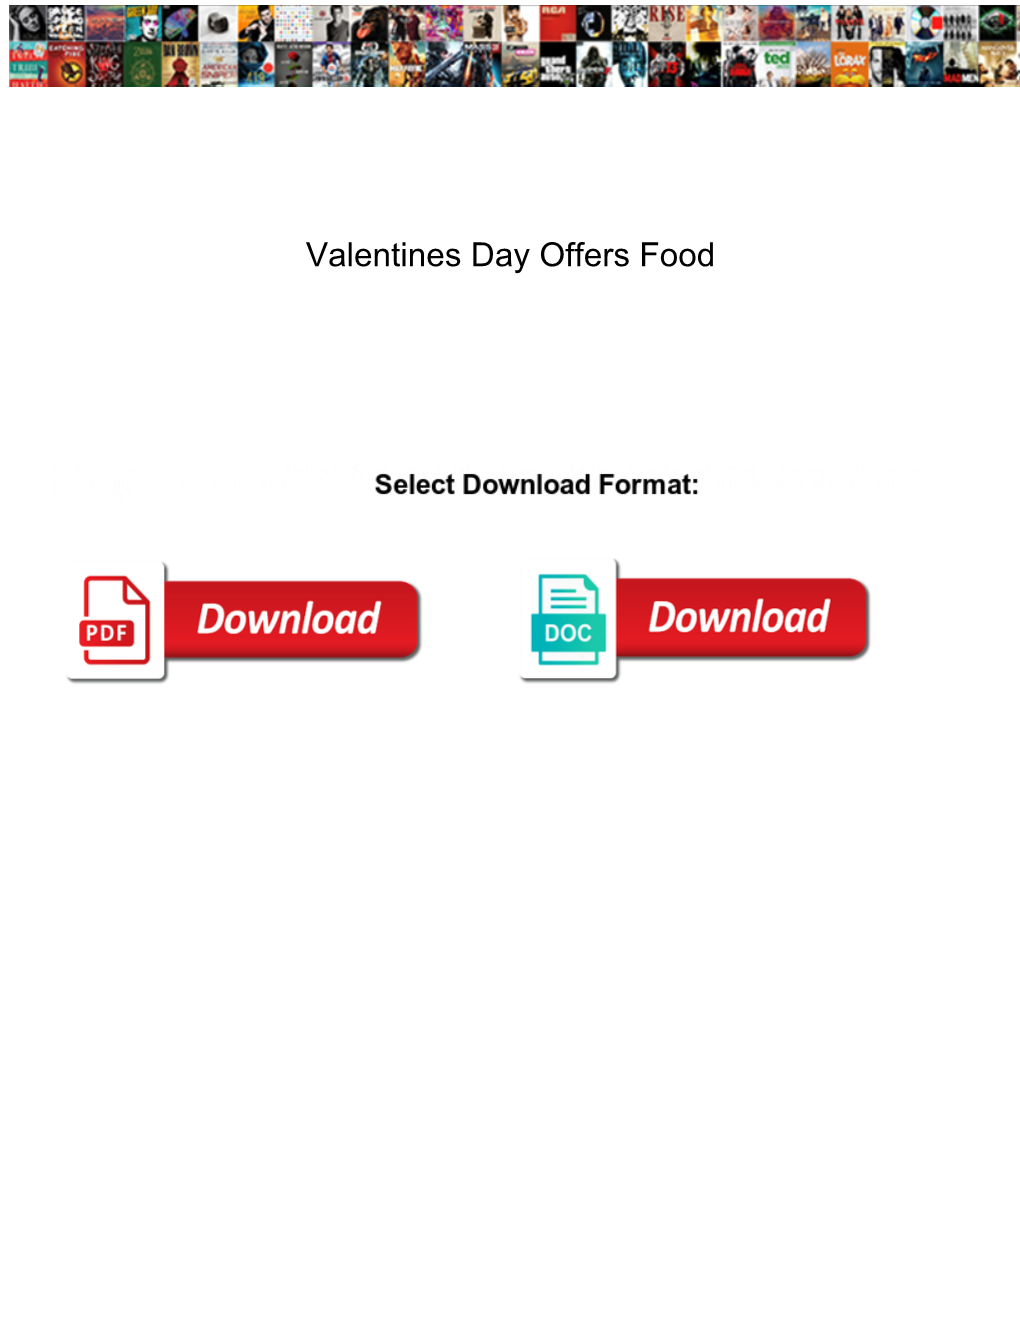 Valentines Day Offers Food